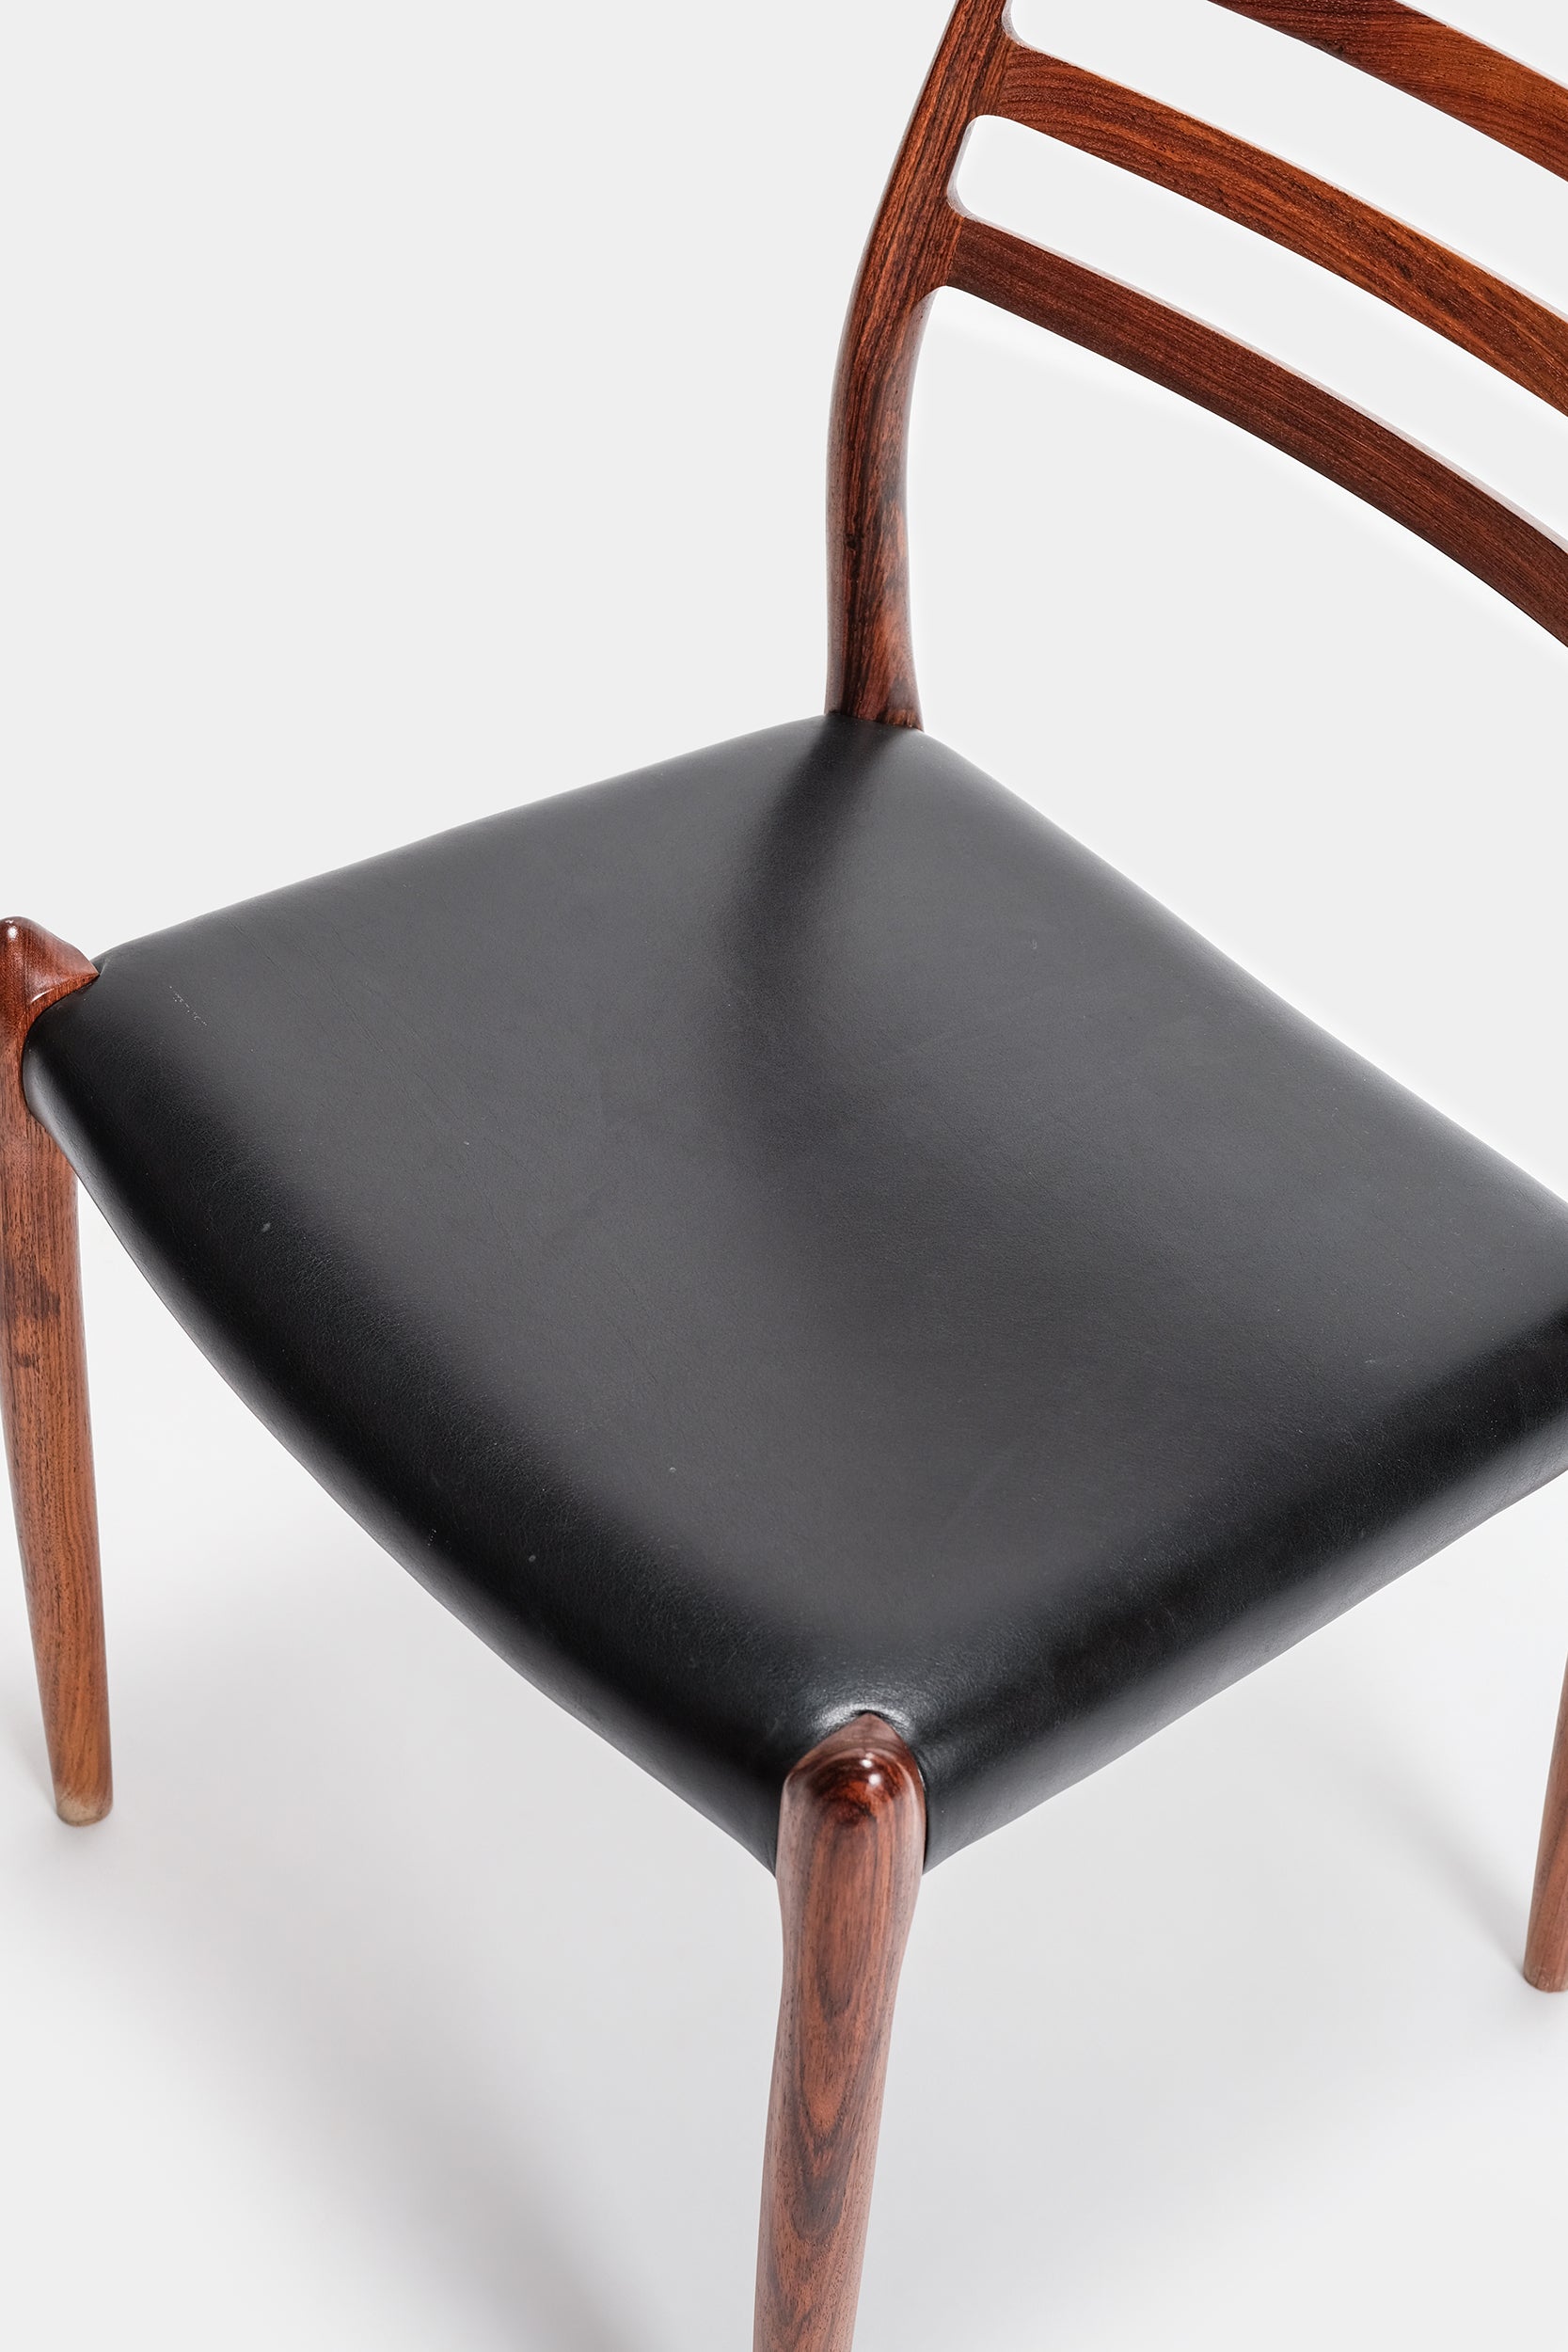 4 Rosewood Niels Otto Møller chairs, by J.L. Mollers, 50s